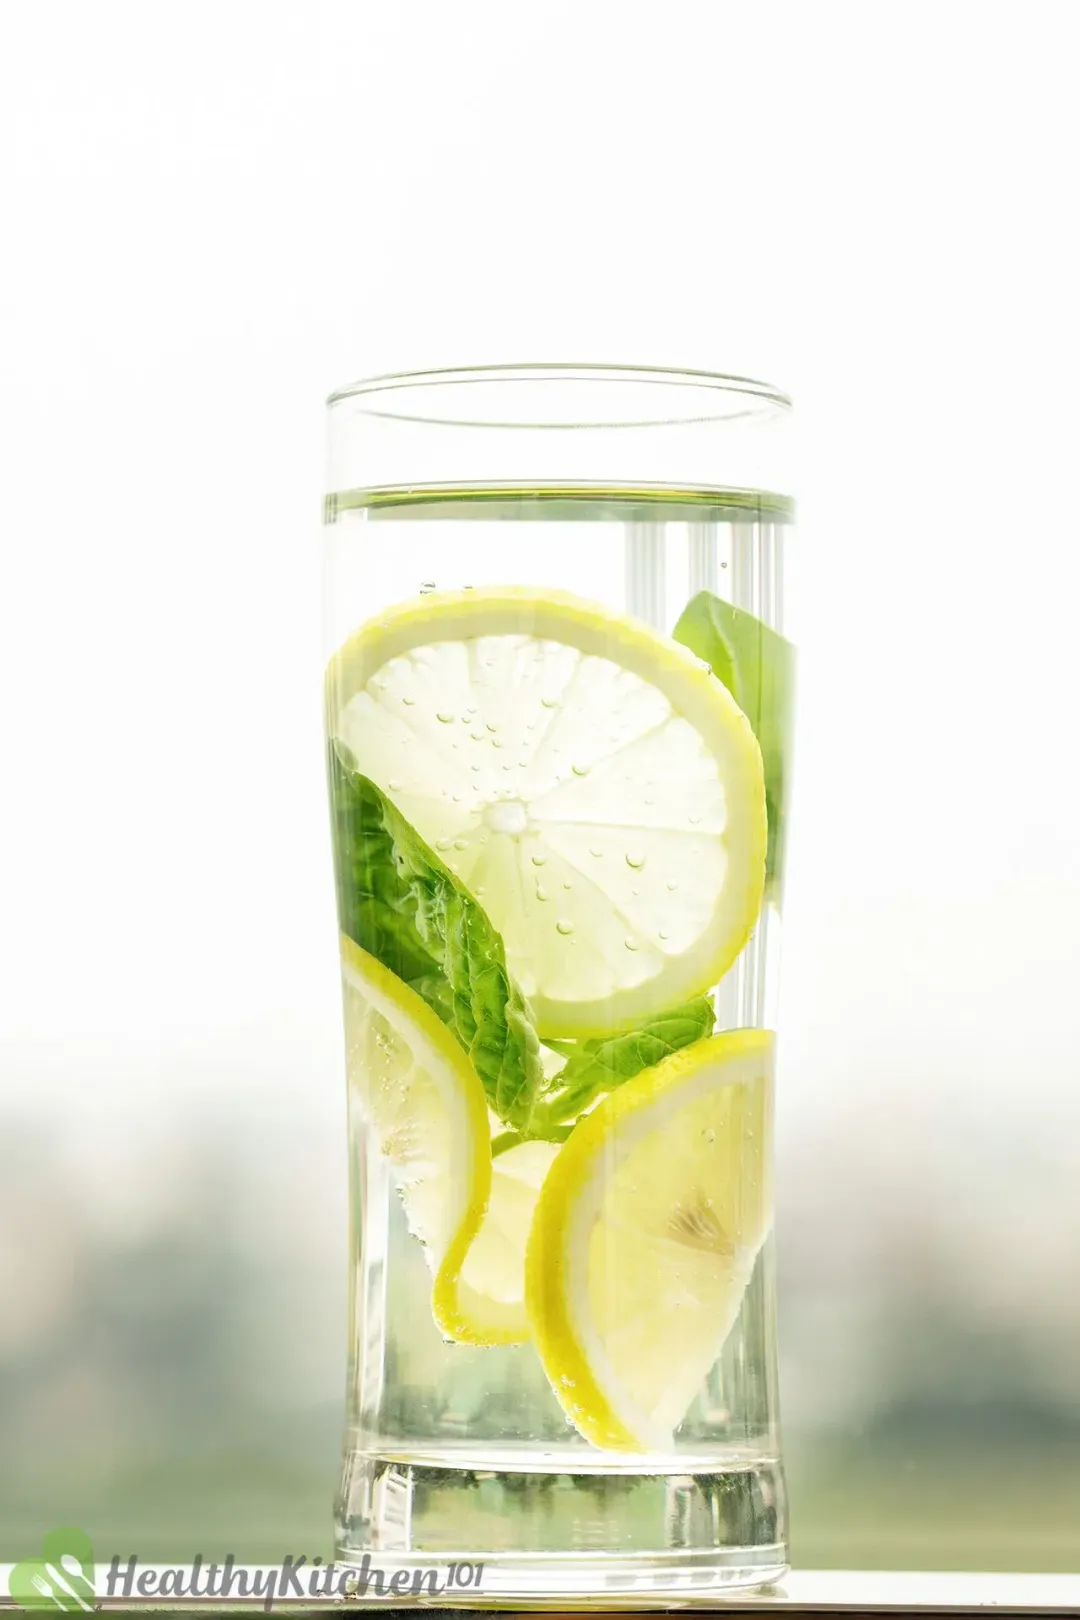 A glass of basil and lemon wheels submerged in clear water